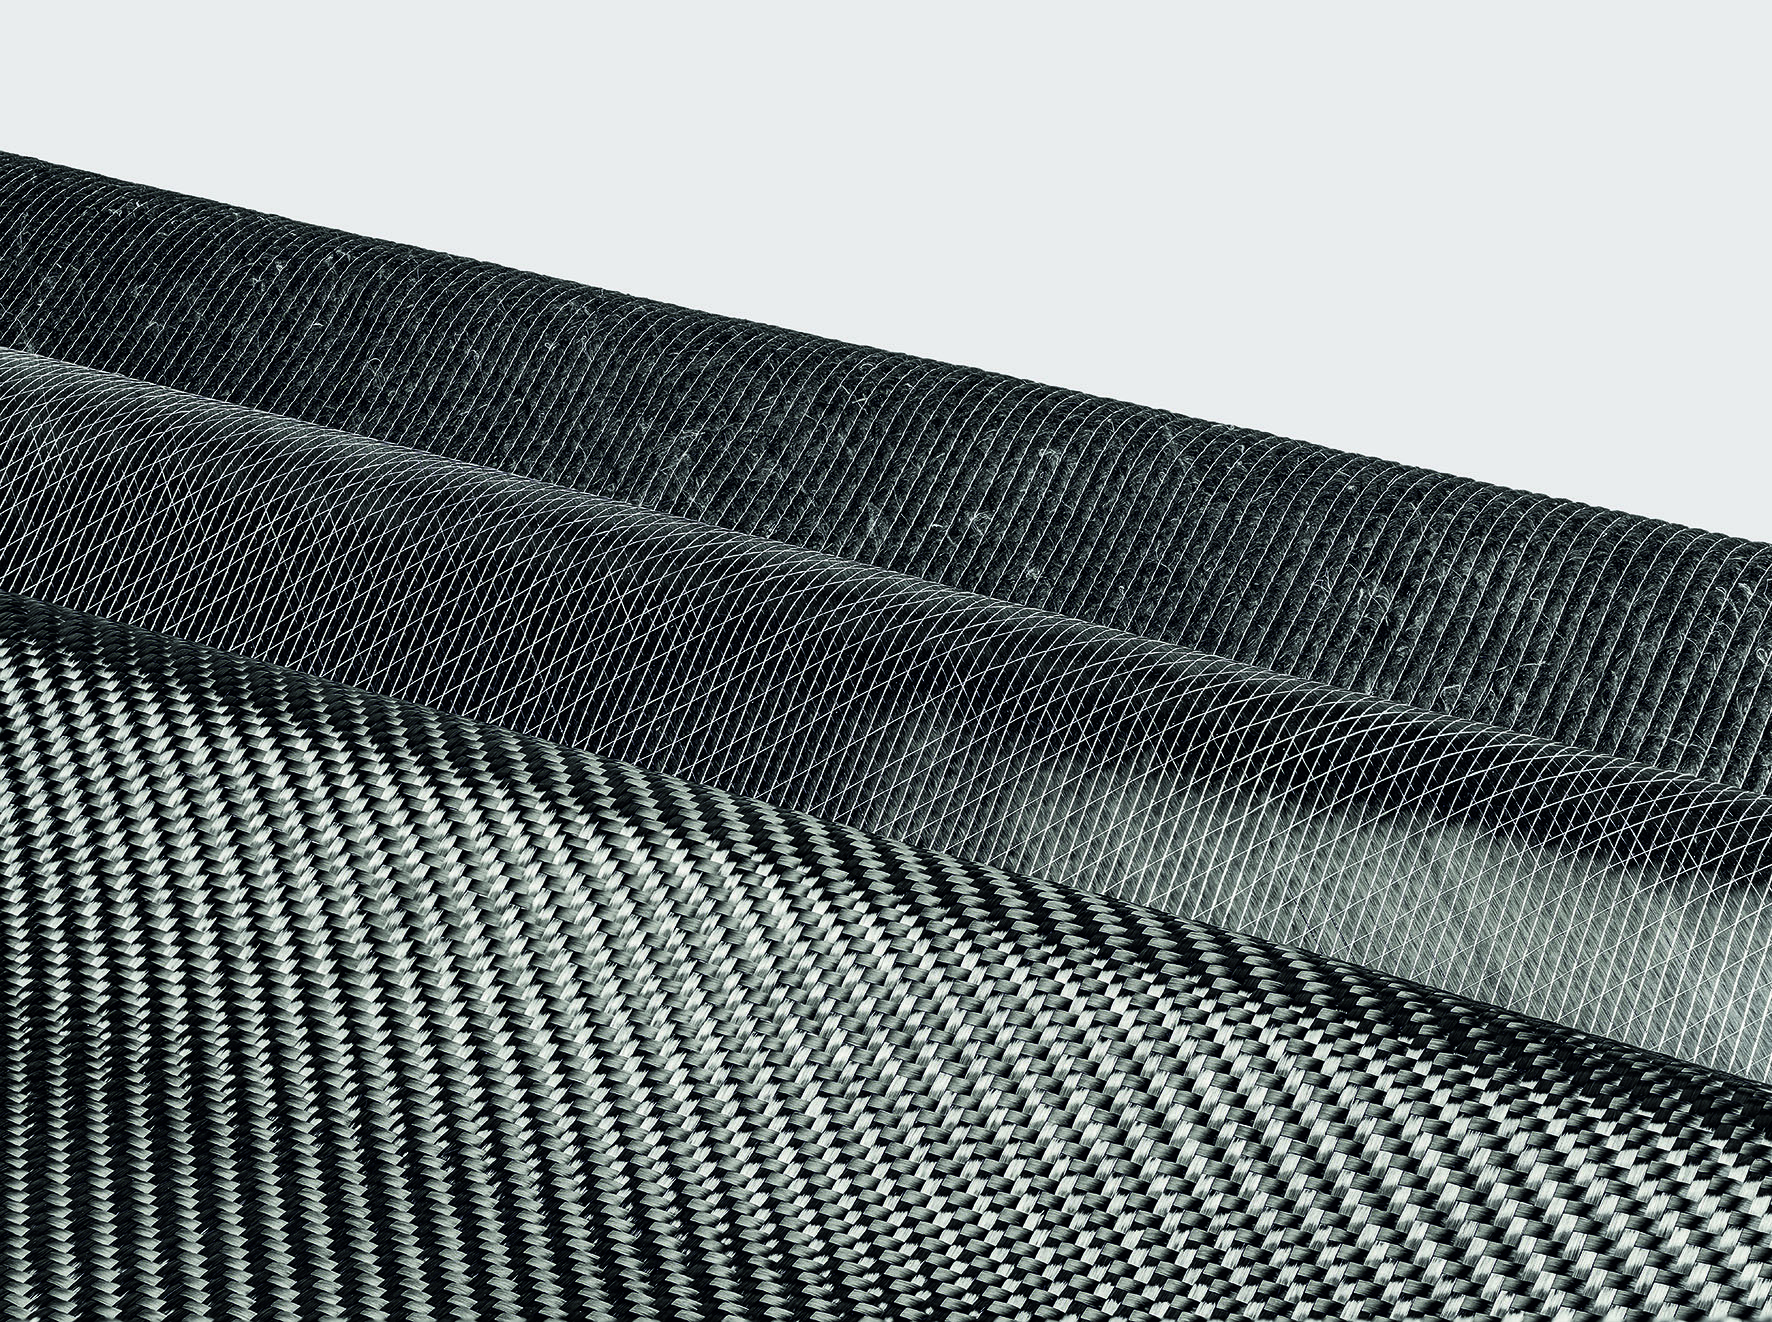 The companies plan to set up a development program for the processing of carbon fiber-based textiles.